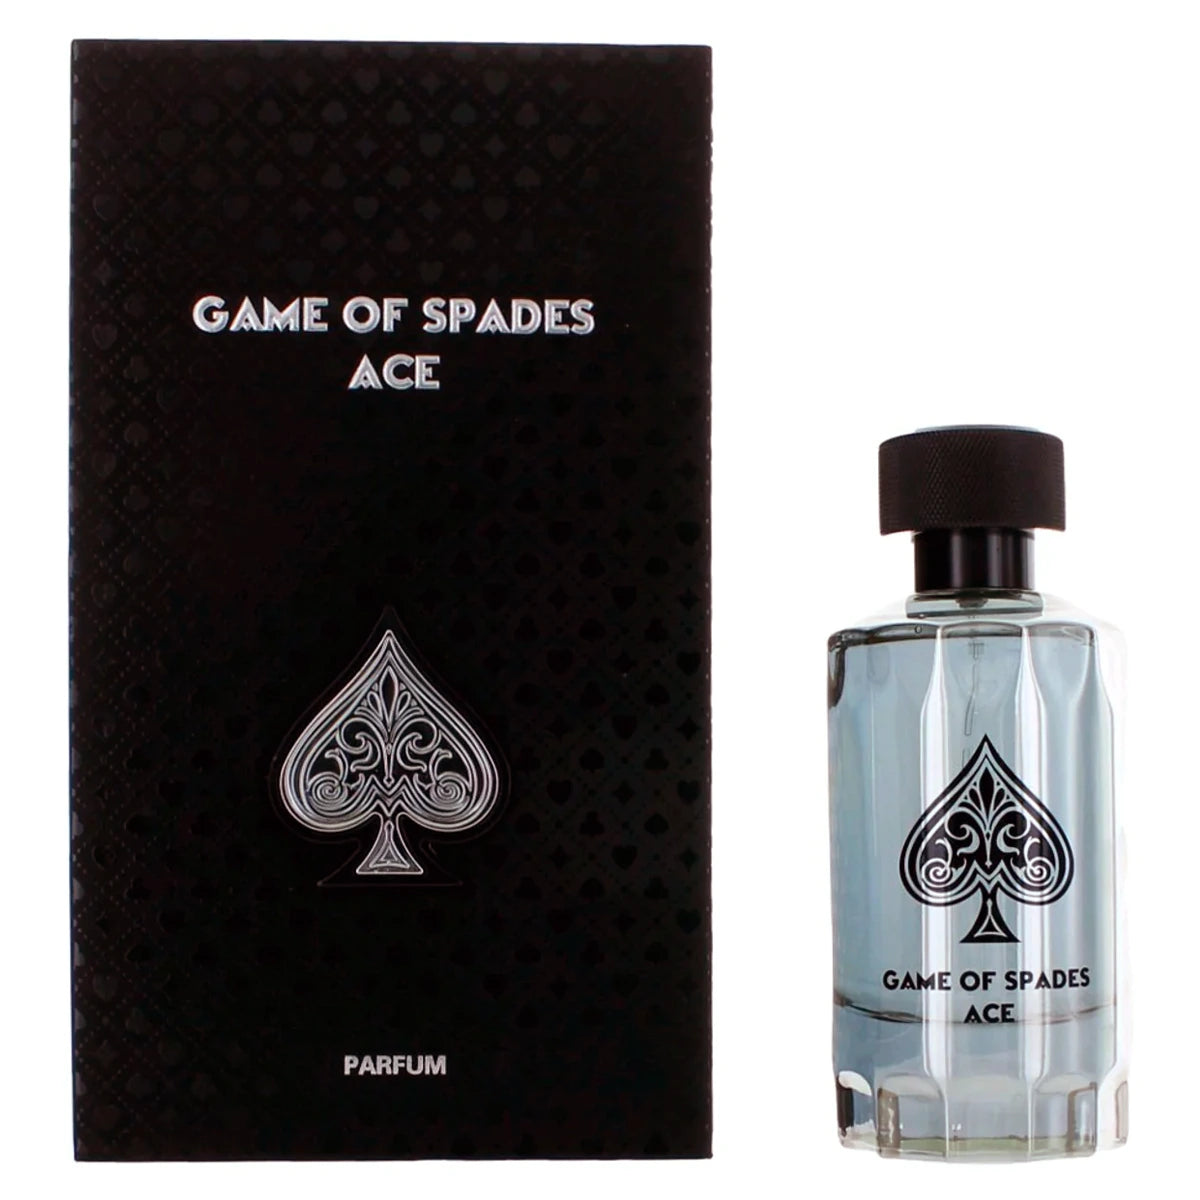 <p><span><em>INSPIRED BY </em><strong>LE LABO ANOTHER</strong></span></p>
<p><span>The warm, spicy and musky fragrance of Game of Spade Ace is a blossoming fragrance for women and men. Launched in 2021, this perfume comes from the heart of Jo Milano Paris. At the start are notes from orange blossom and lemon zest. The heart is filled with hints from spices, while the notes of musk, amber and sandalwood fills the base.</span></p>